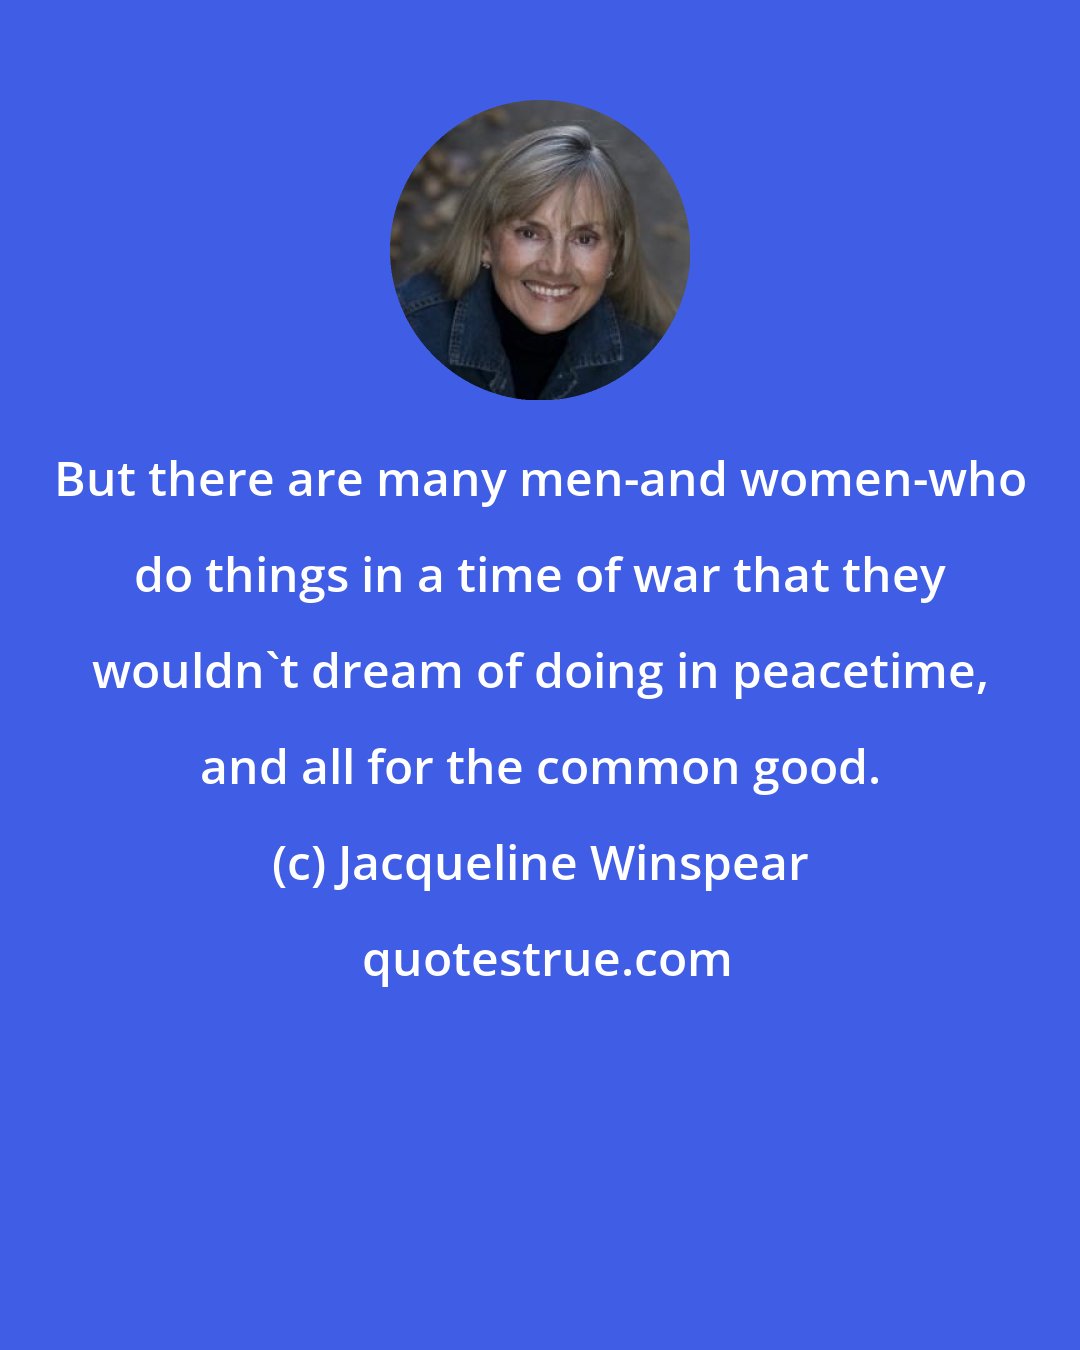 Jacqueline Winspear: But there are many men-and women-who do things in a time of war that they wouldn't dream of doing in peacetime, and all for the common good.